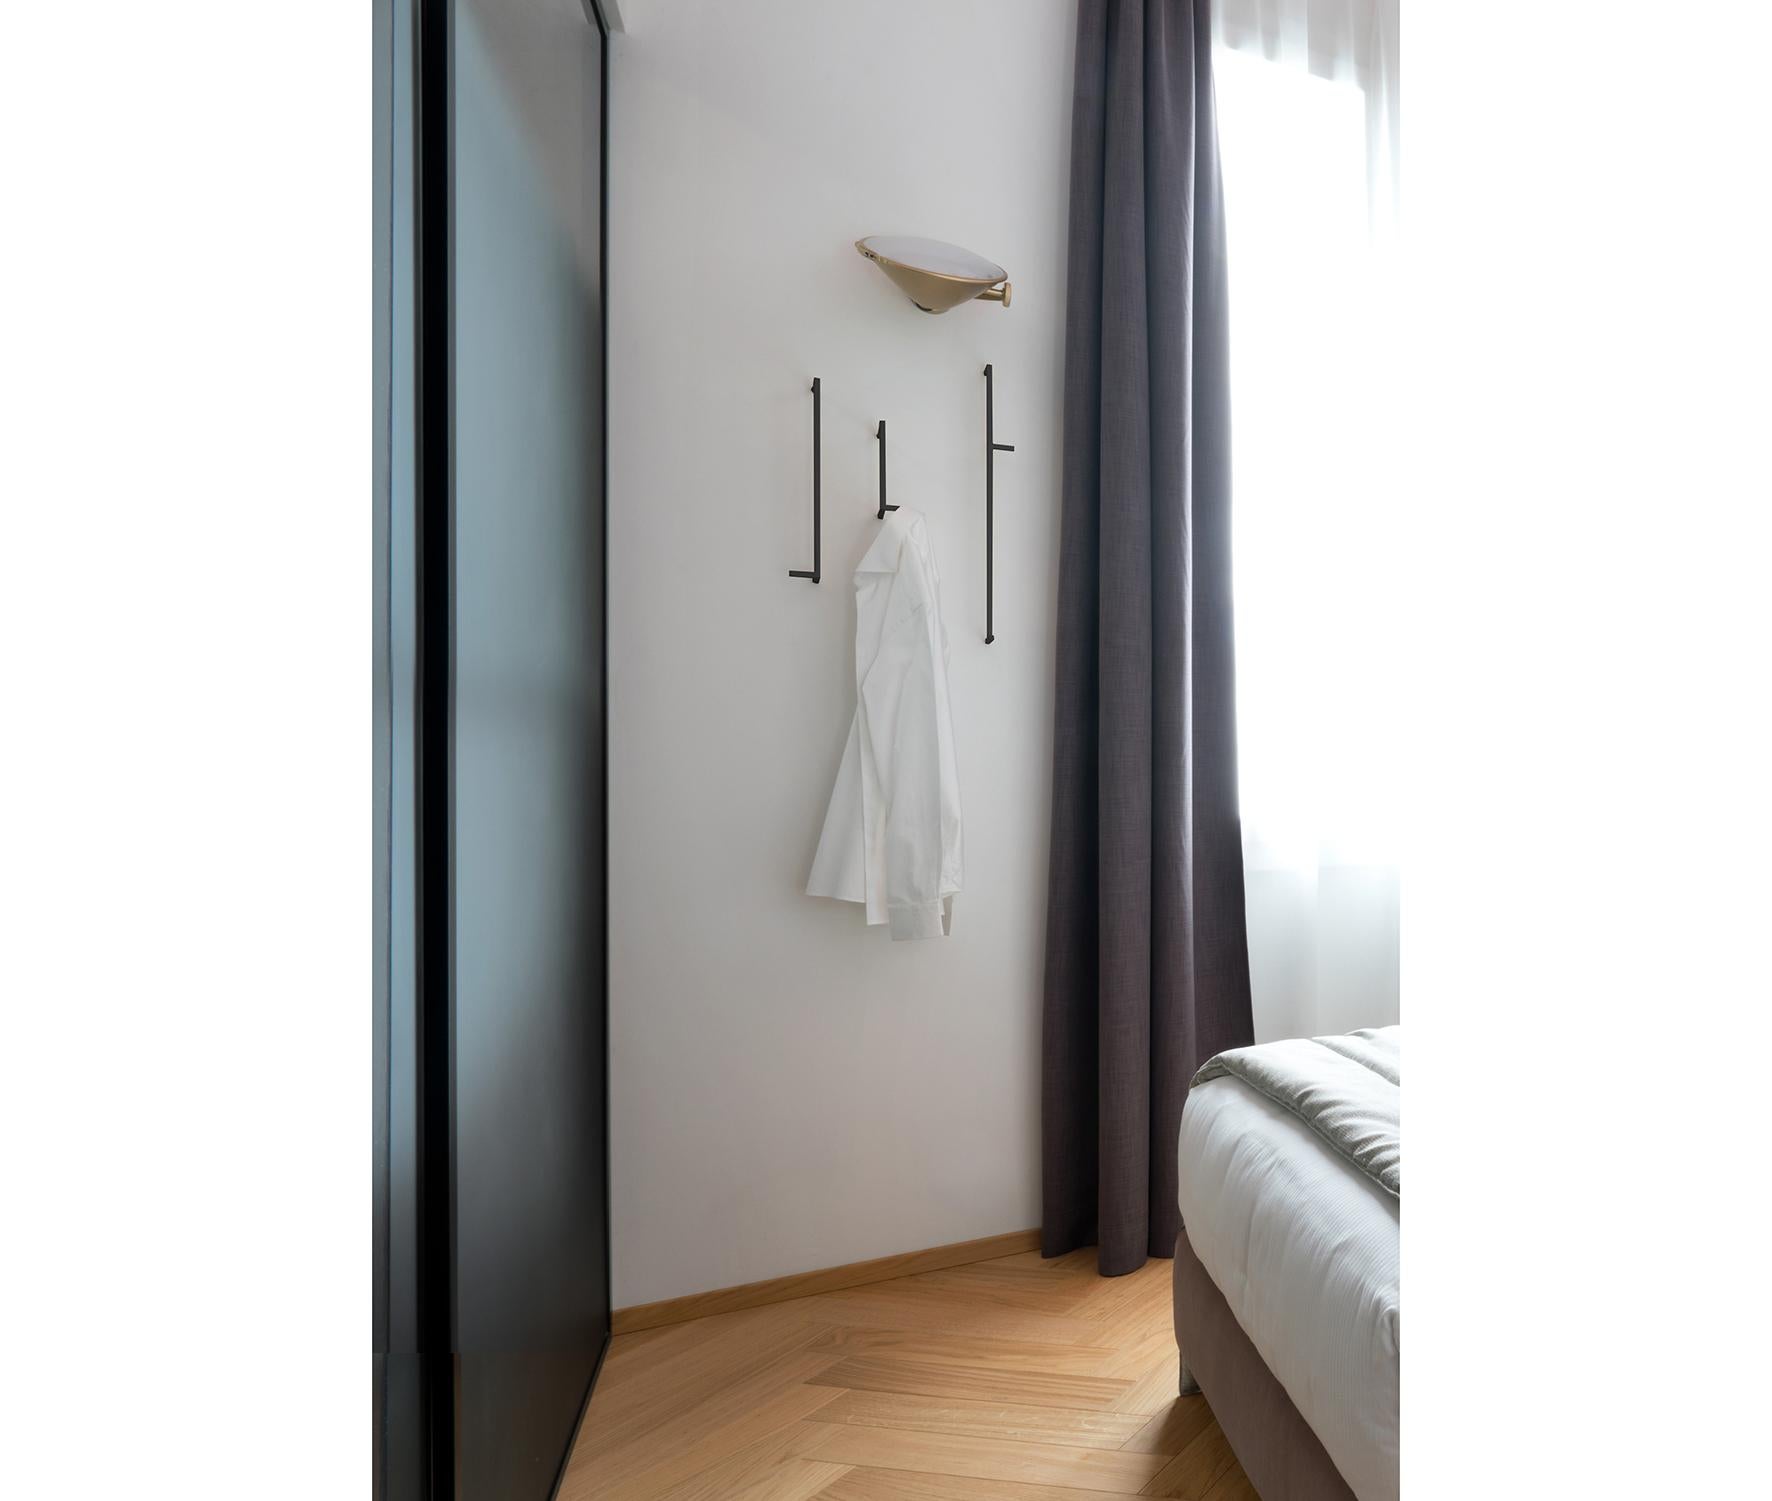 Dieci Dieci set of 3 hangers by Mentemano
Dimensions: 10 x 5 x 60 / 9 x 5 x 40 / 12,5 x 5 x 18 cm
Materials: Matt black brass

Mentemano is a design concept brand leading to a precise matter: is the “mente” (mind) leading the “mano” (hand) to